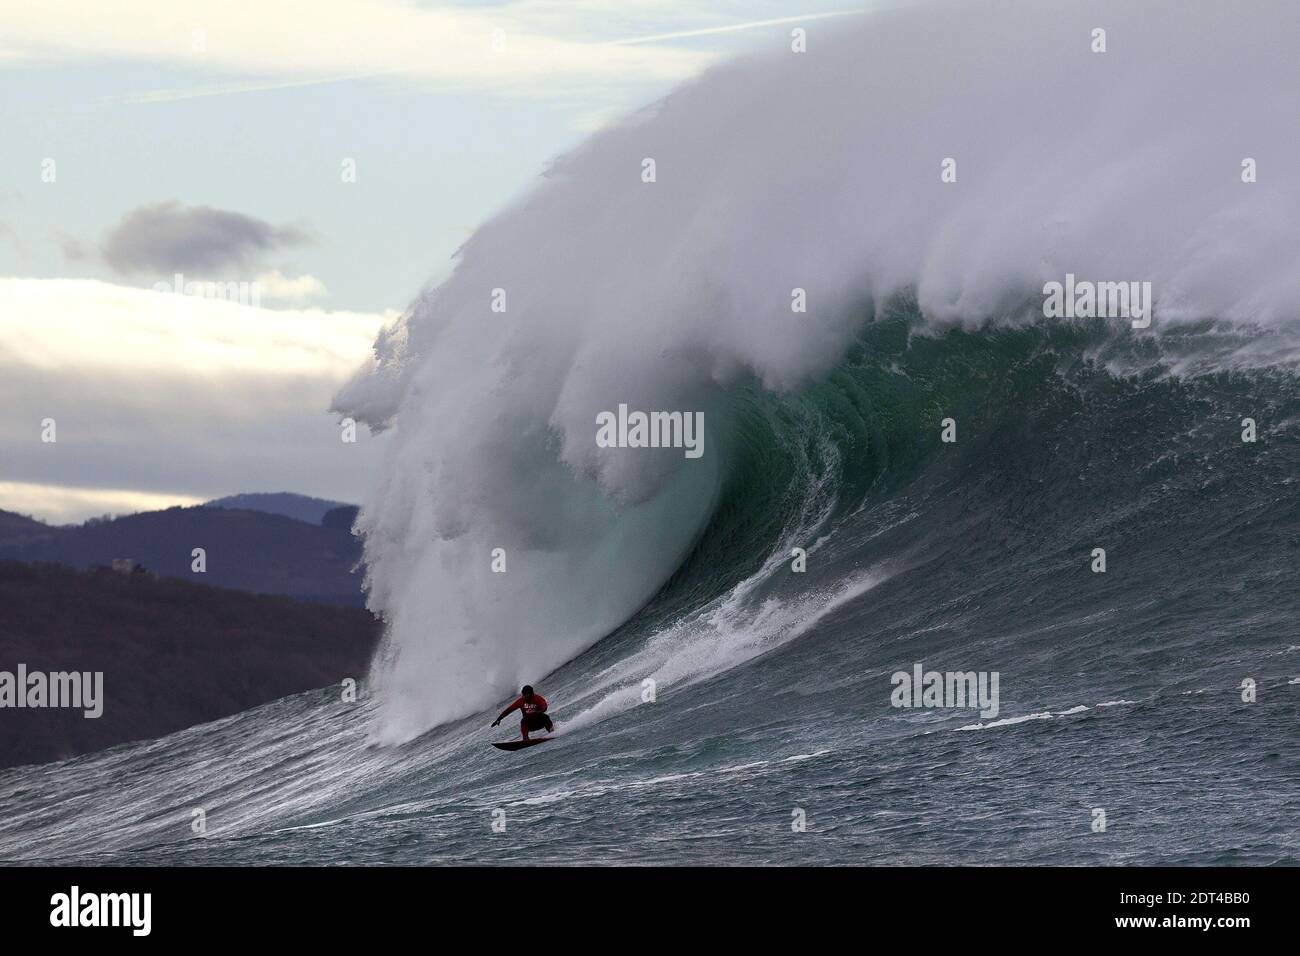 A man surfs the Belharra giant waves some two kilometers off the coast of the French basque country town of Urrugne near Saint-Jean-De-Luz, France on January 7, 2014. Thanks to certain climatic conditions in autumn and winter, a strong swell hits the Belharra Perdun underwater spur enabling a 10 to 15 metre wave to form. This wave is only surfed by experts who are towed out by a water scooter. Photo by Masurel/Photomobile/ABACAPRESS.COM Stock Photo